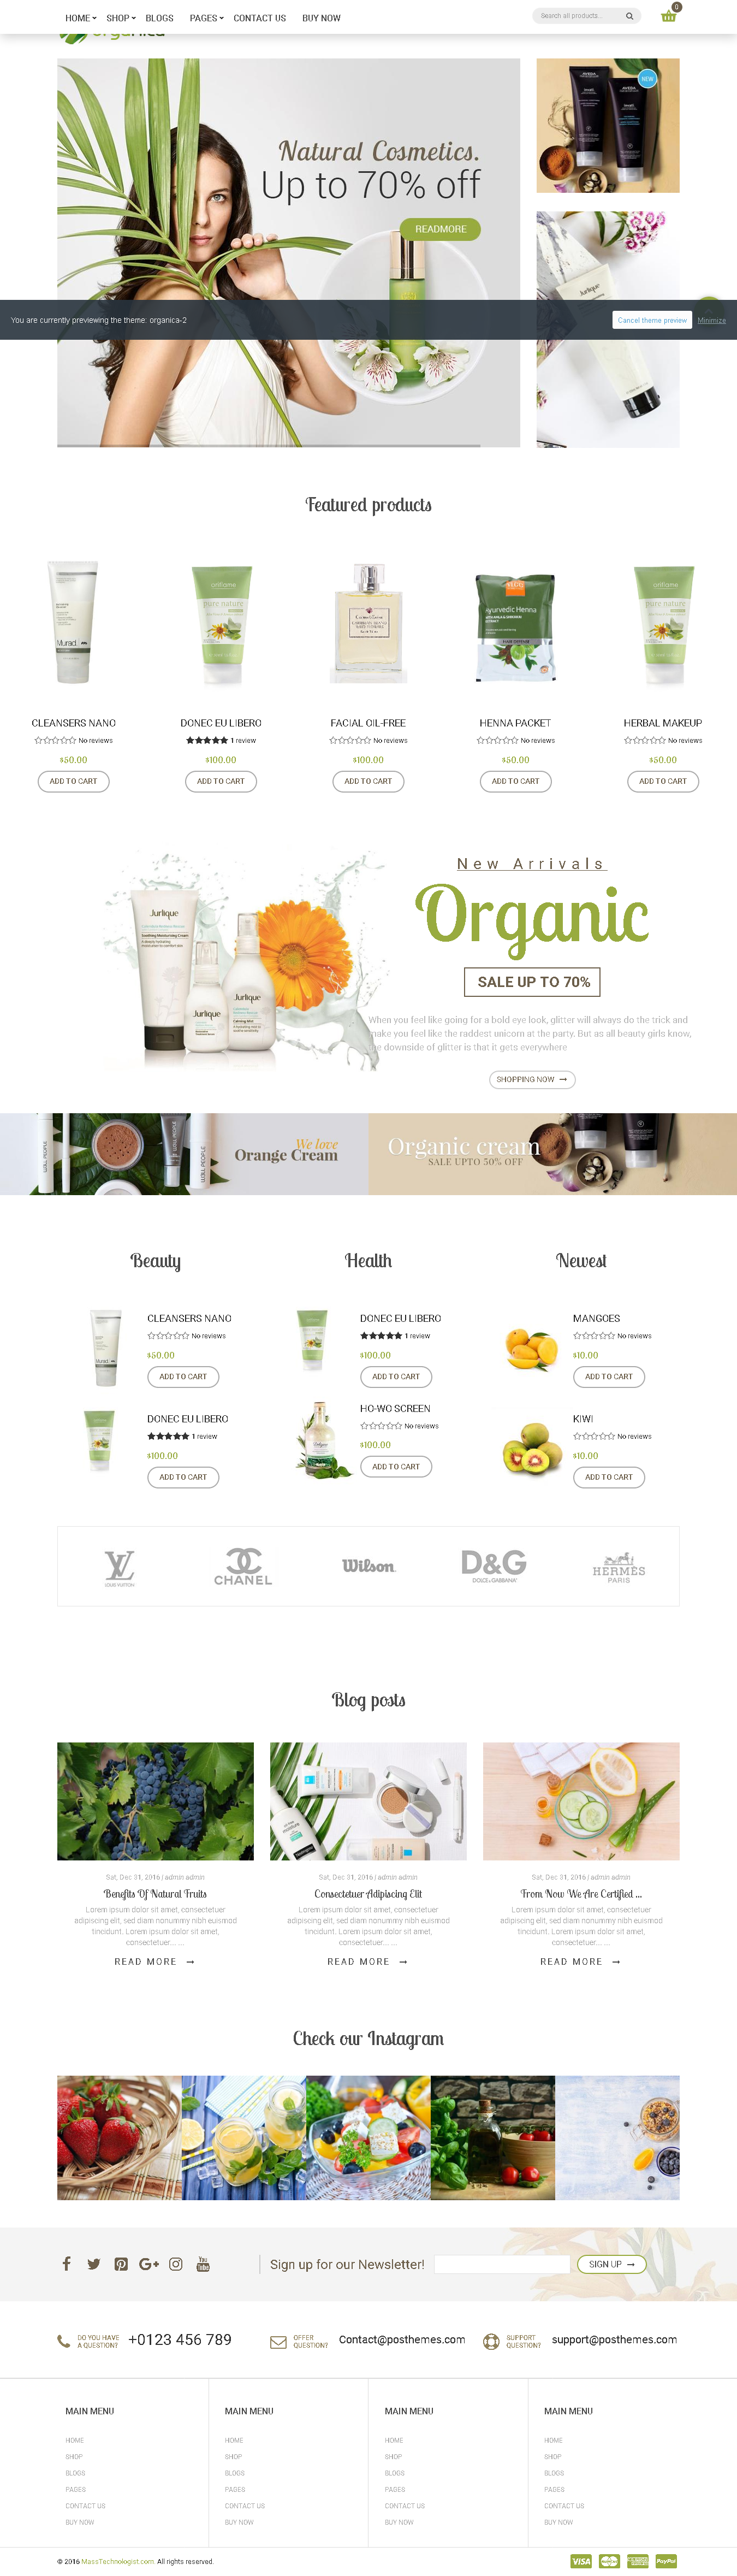 Best SHOPIFY Premium Themes Collection for Cosmetics Stores - Organica - Organic, Beauty, Natural Cosmetics, Food, Farn and Eco drag and drop Shopify Theme